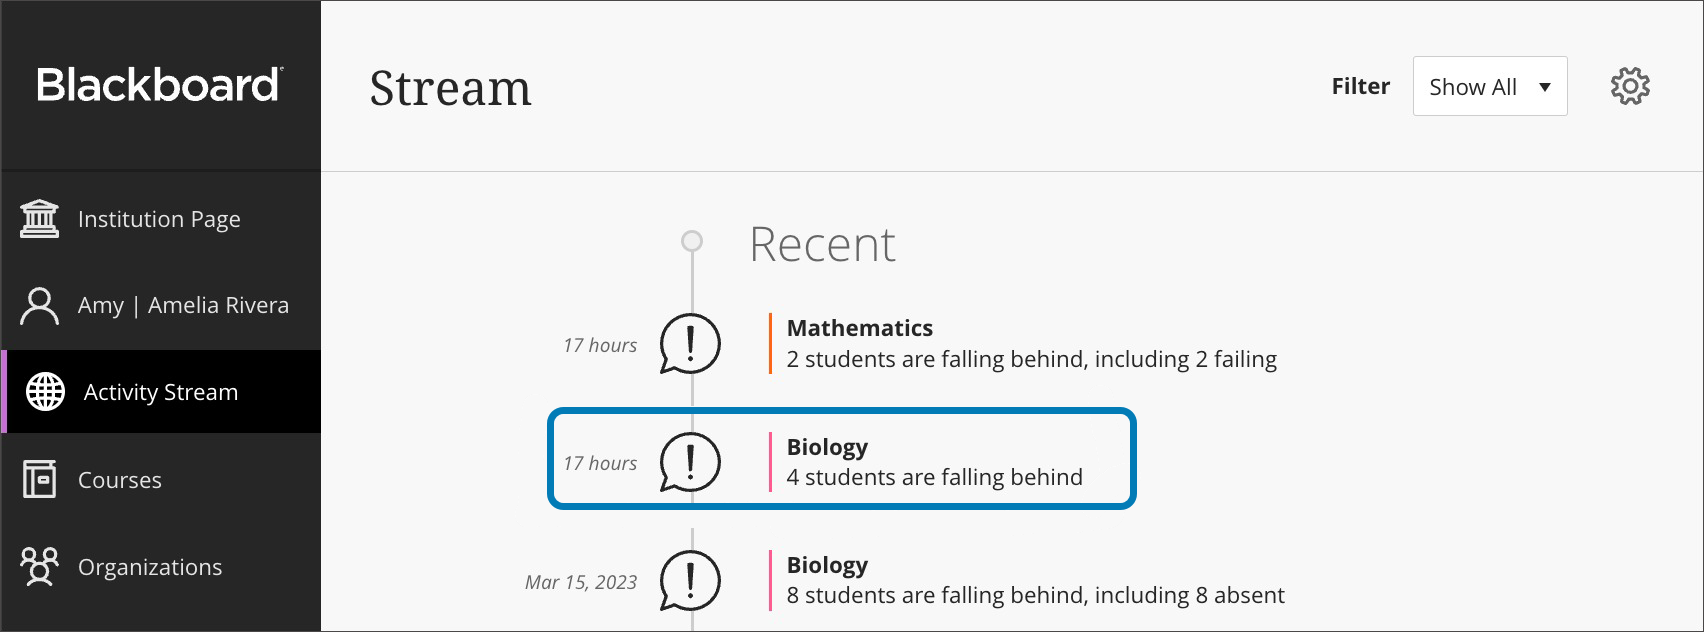 Screenshot of the Activity Stream tab of the base navigation. One of notifications, outlined in blue, shows that there are 4 students falling behind in Biology.